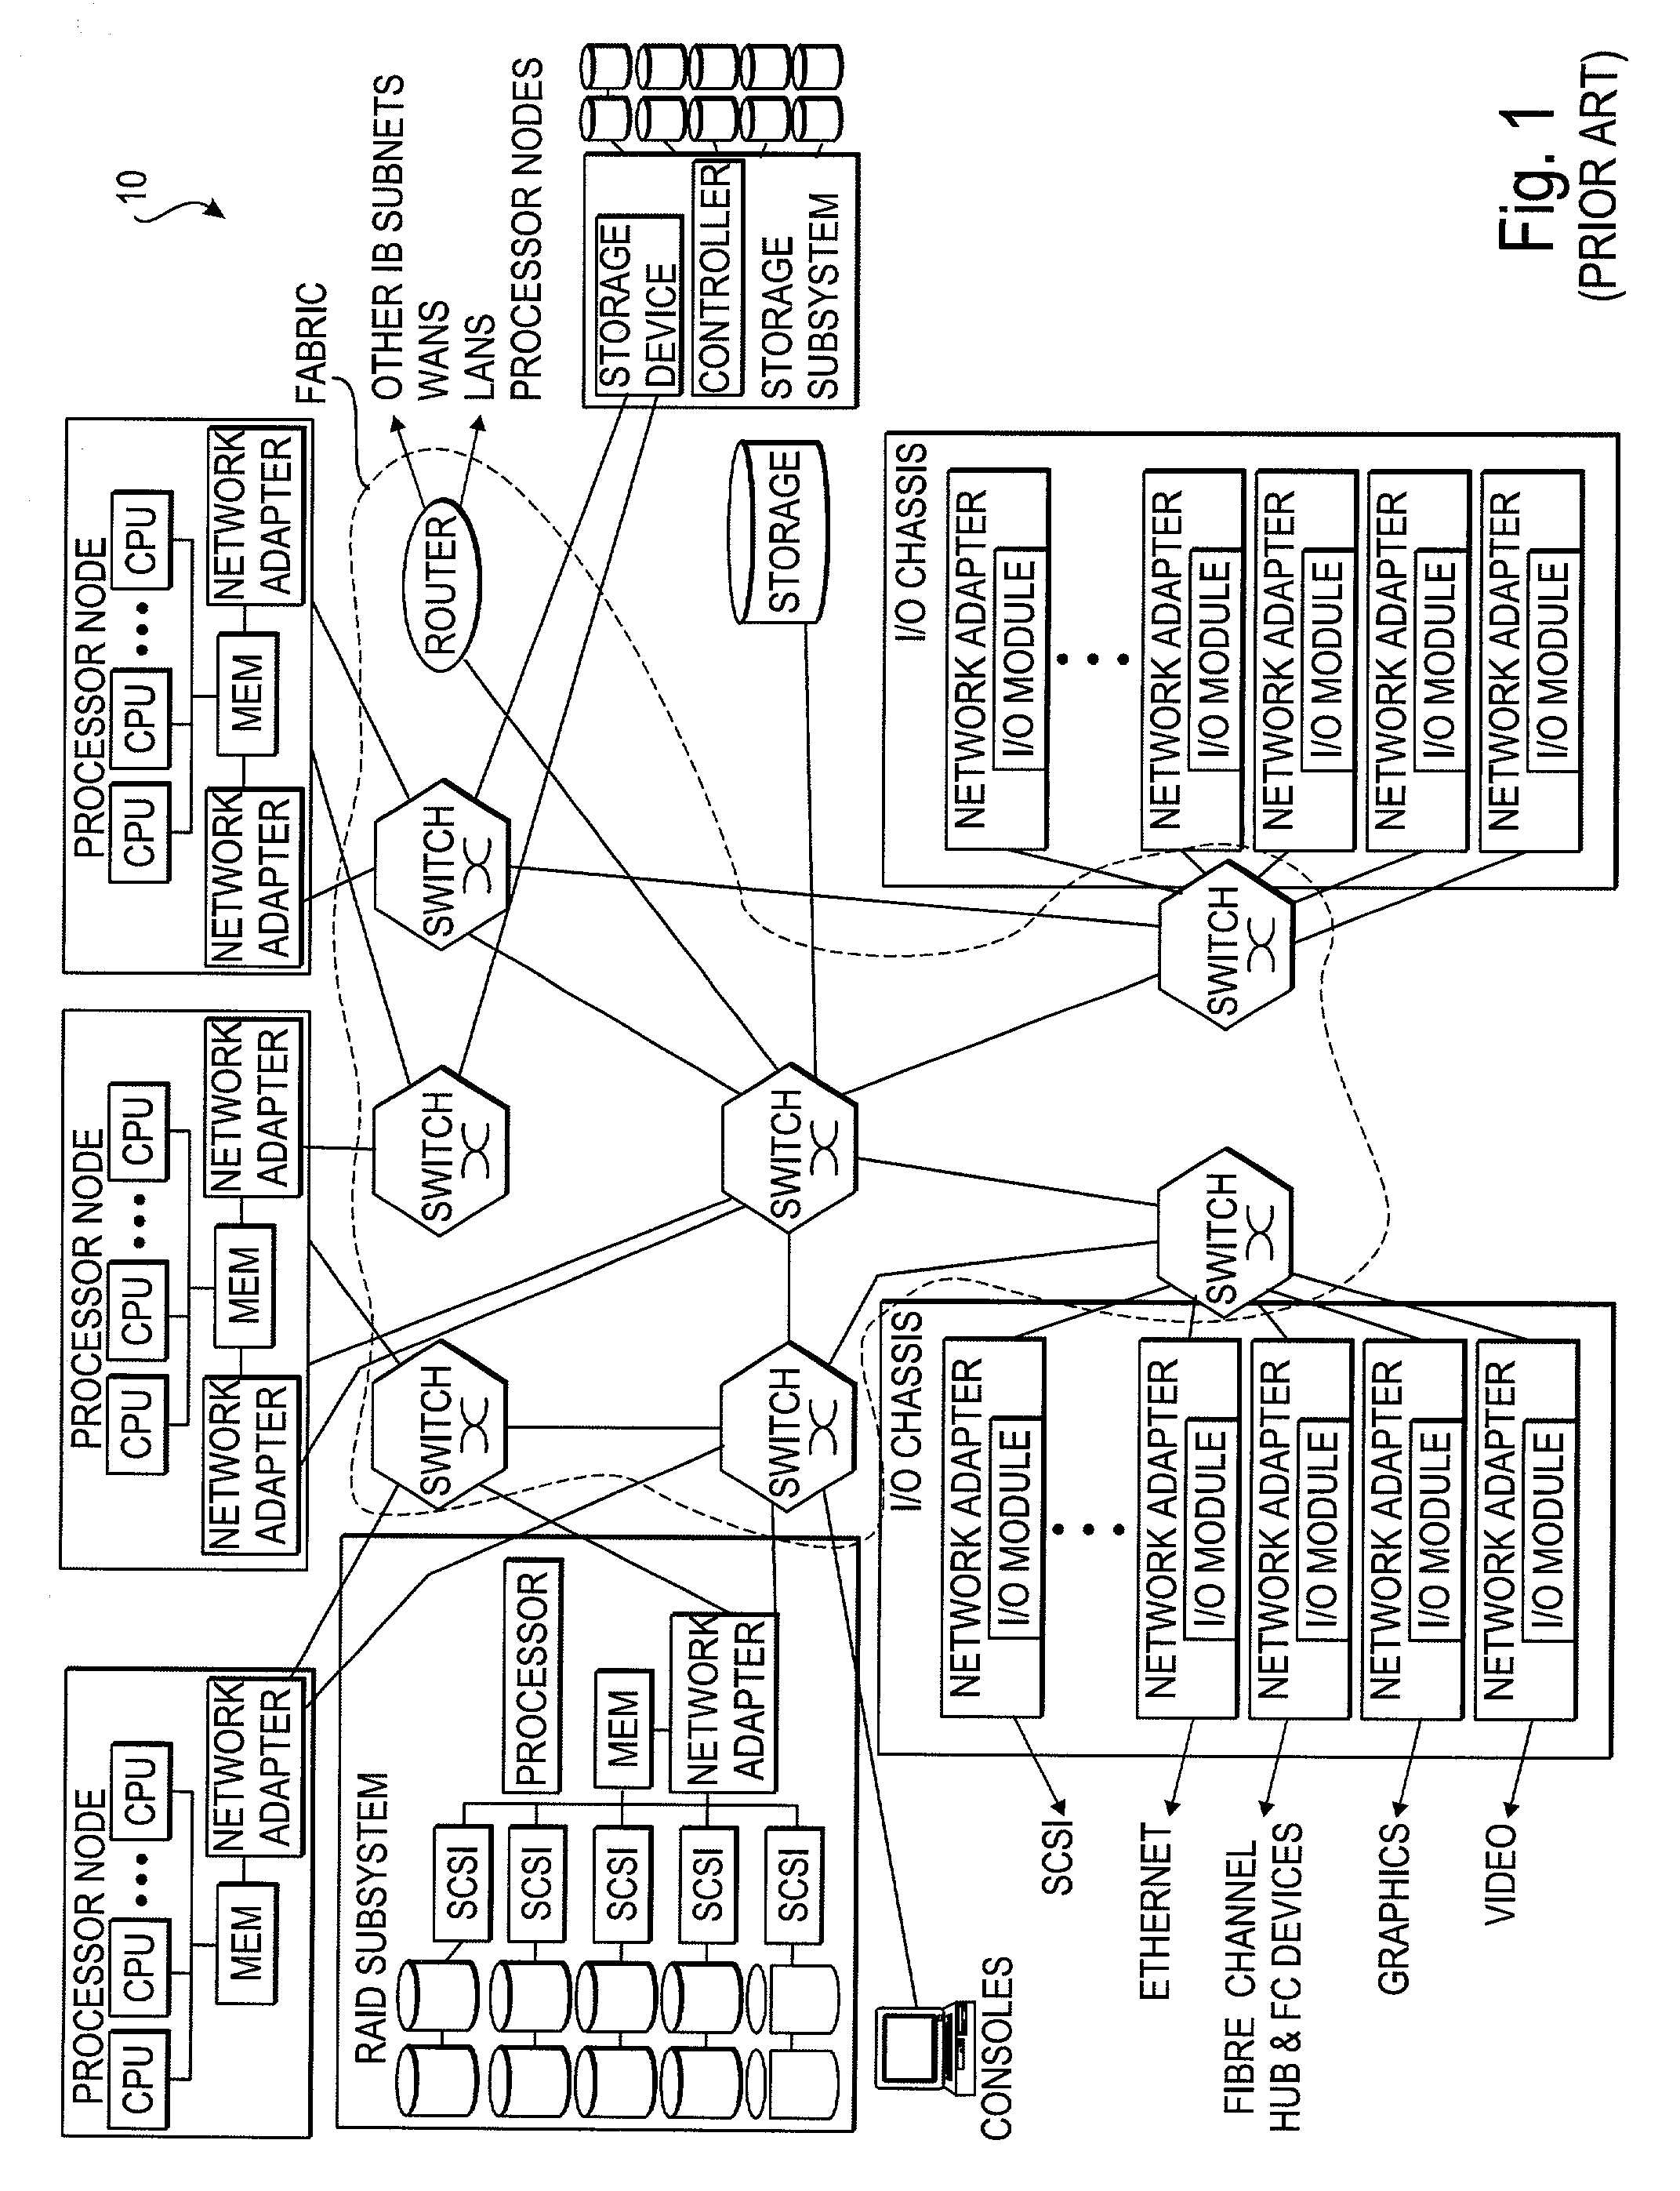 Method and system to allocate resources within an interconnect device according to a resource allocation table